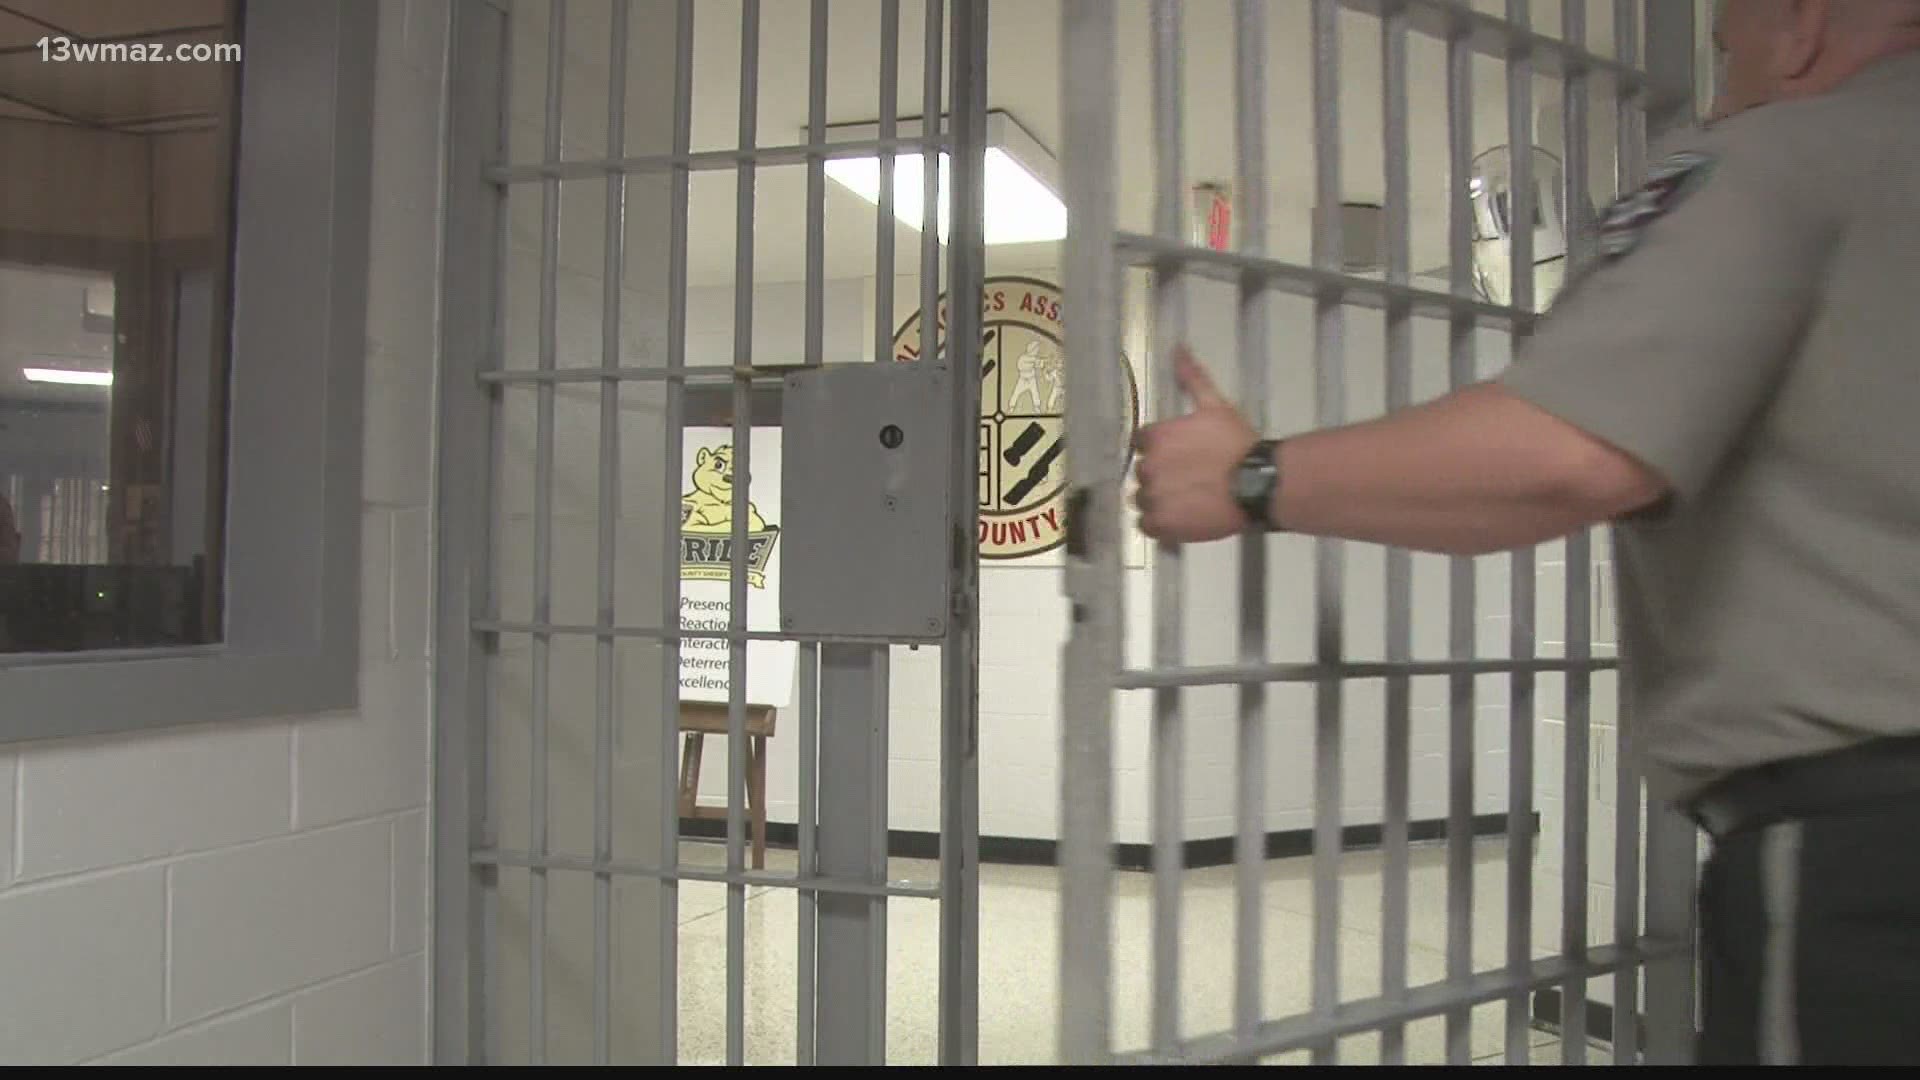 Sheriff David Davis announced changes coming to the jail, including a new training from a Department of Corrections Team.